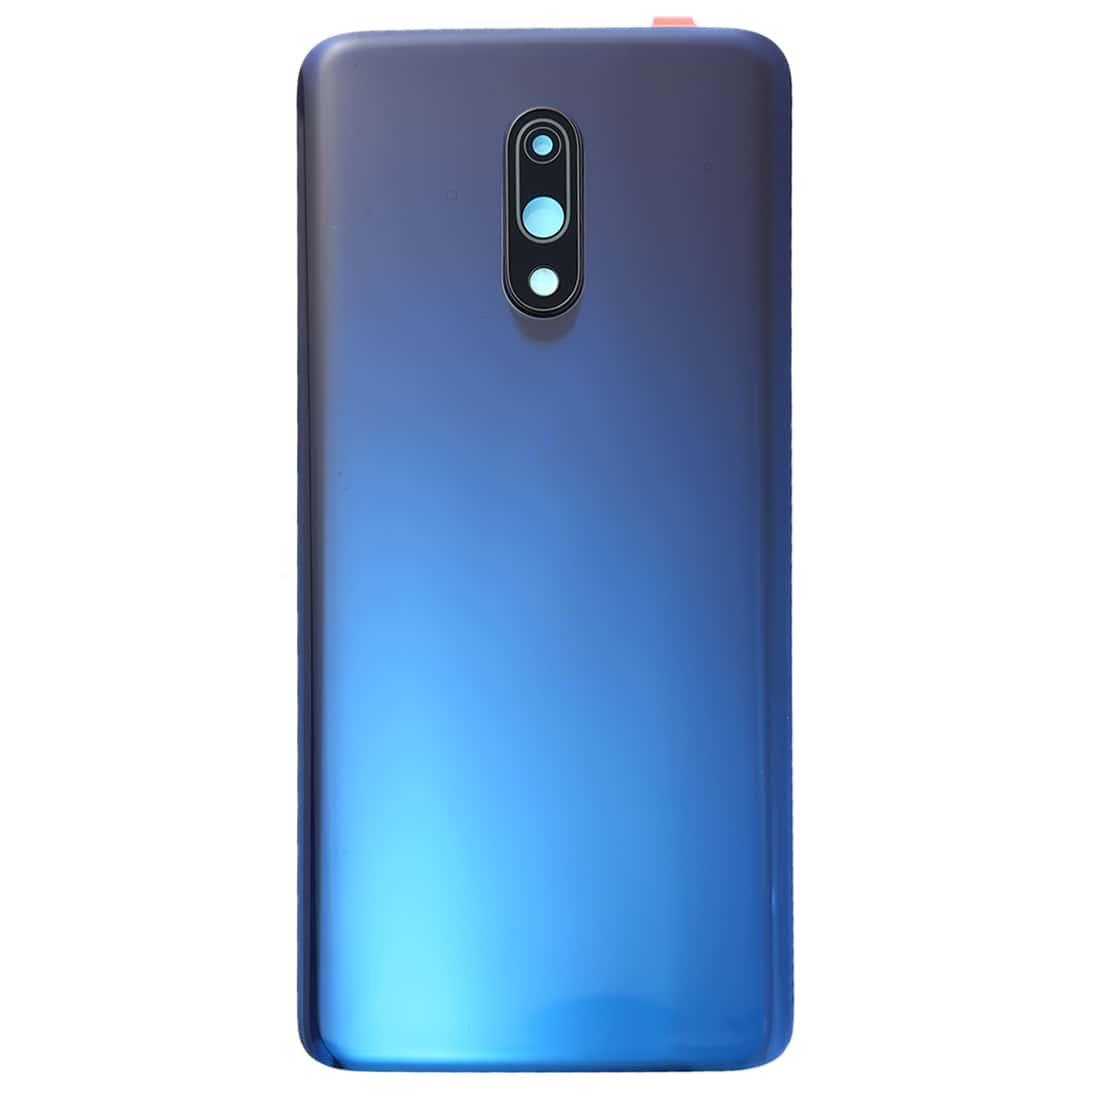 Back Glass Panel for Oneplus 7 Blue with Camera Lens